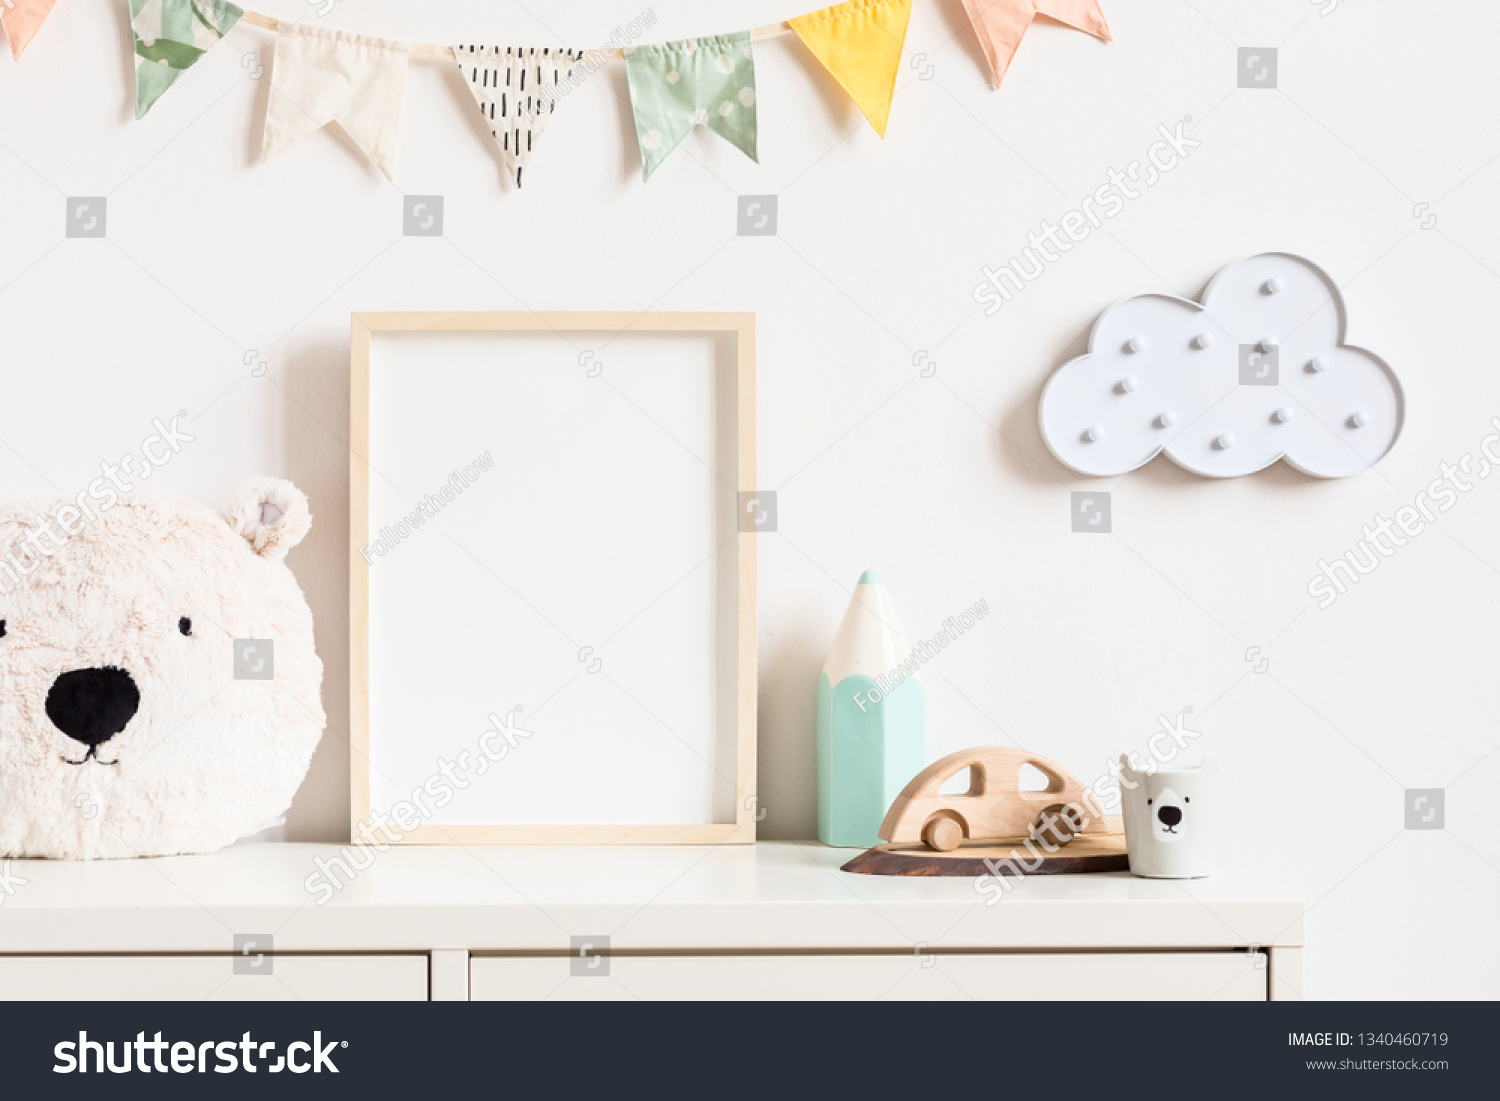 Stylish and modern scandinavian newborn baby interior with mock up photo or poster frame on the white shelf. Toys, teddy bear, wooden car and hanging cotton colorful flags and star. Template. Blank. #1340460719